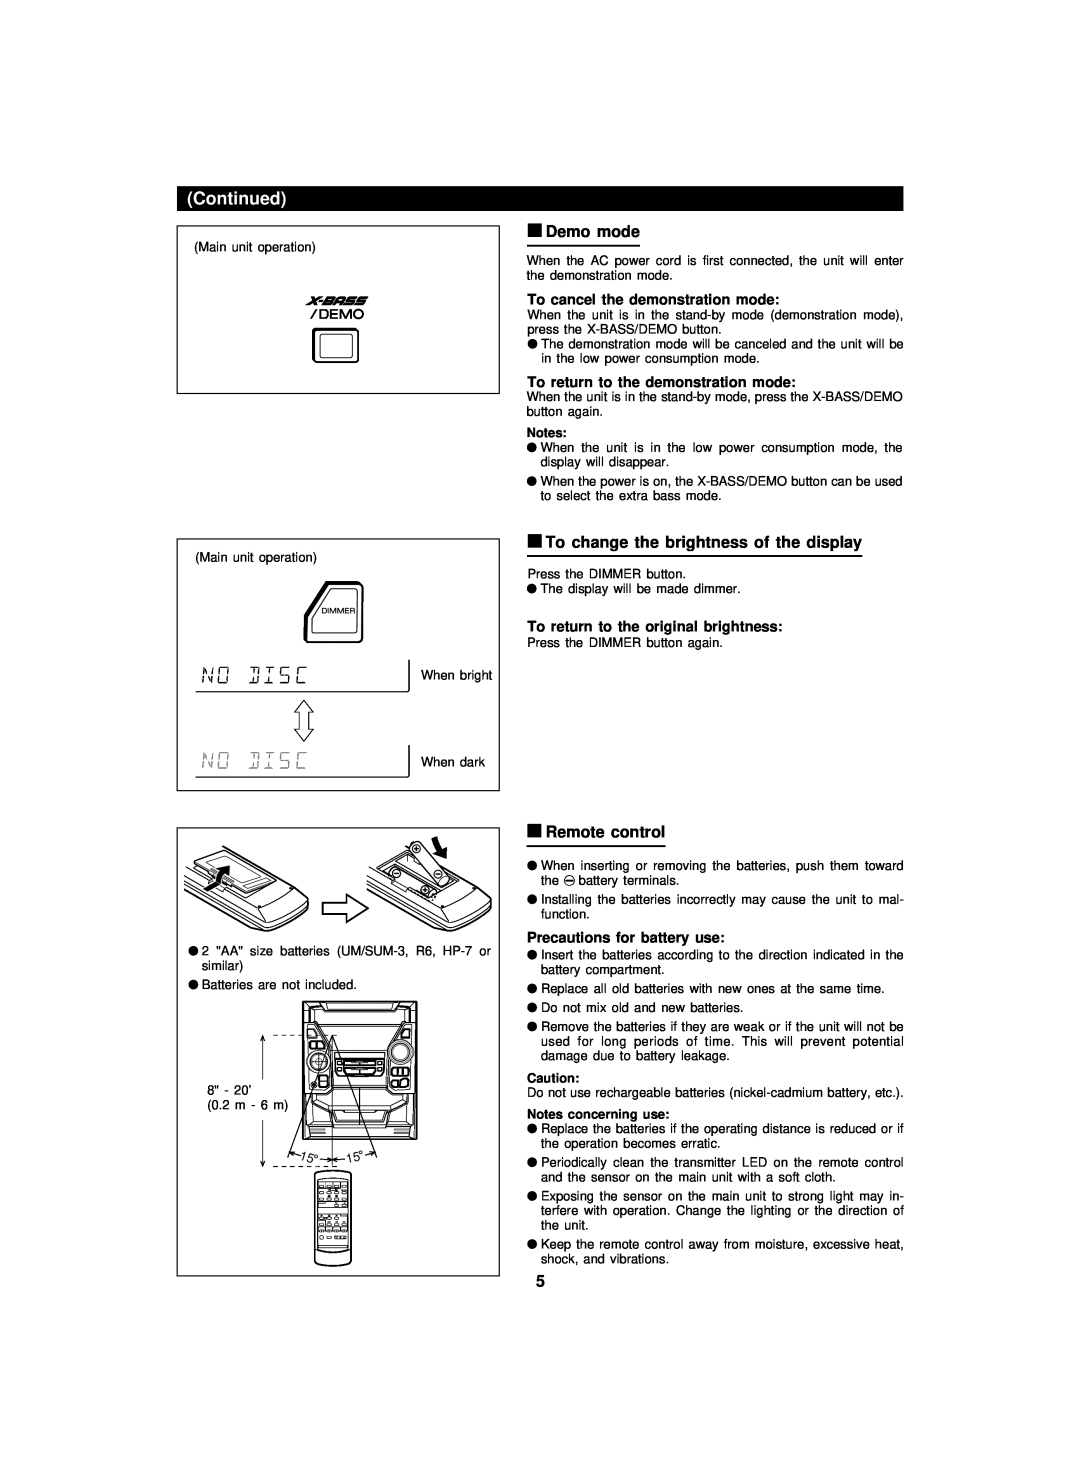 Sharp CD-BA2100 Continued, To cancel the demonstration mode, To return to the demonstration mode, Notes concerning use 